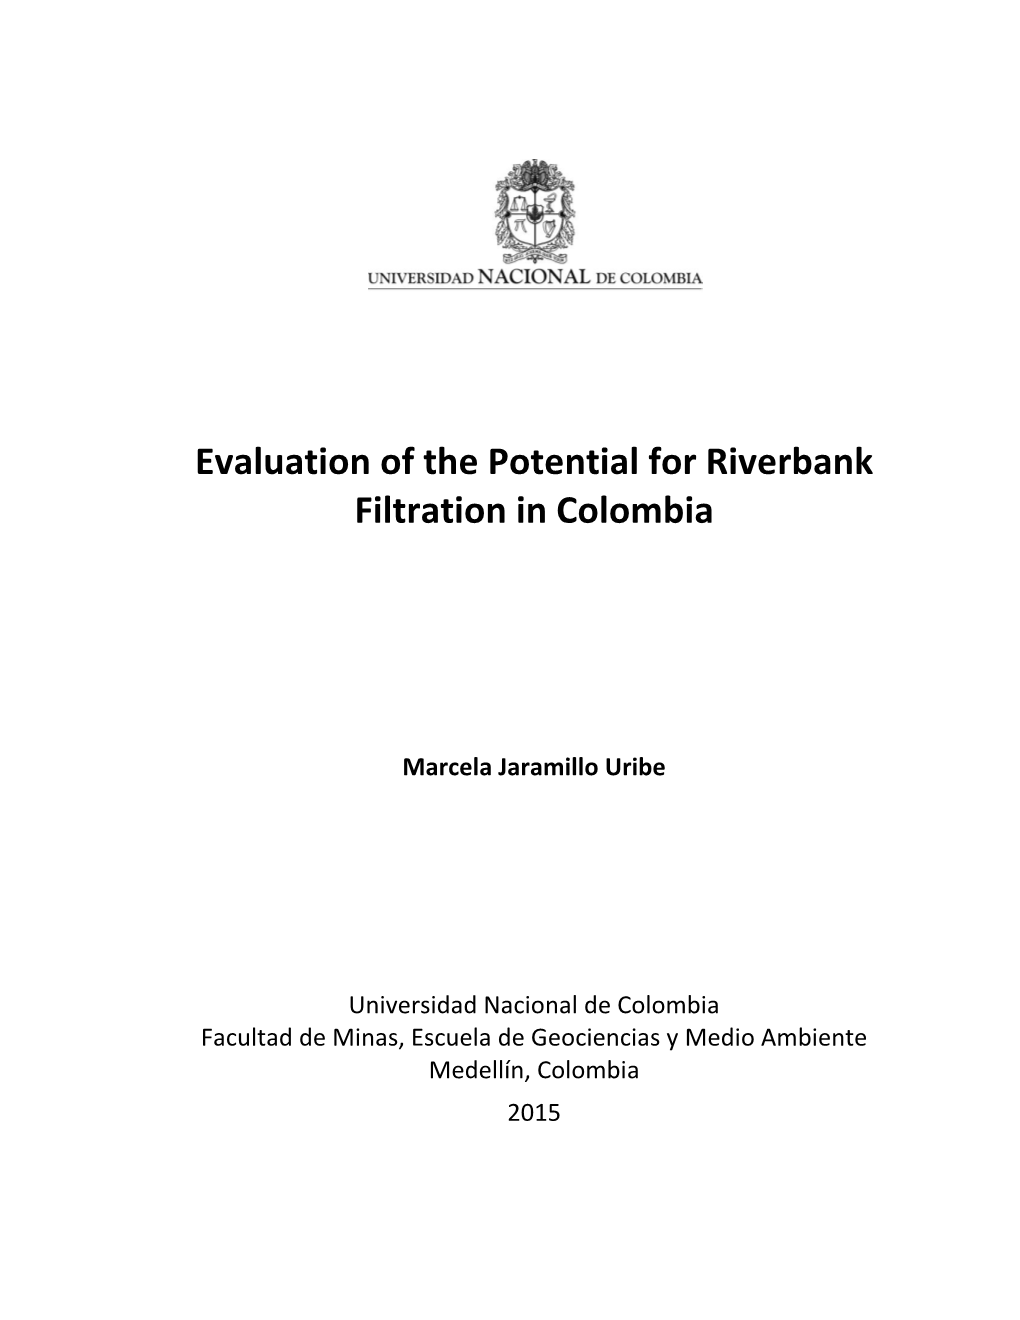 Evaluation of the Potential of Riverbank Filtration in Antioquia